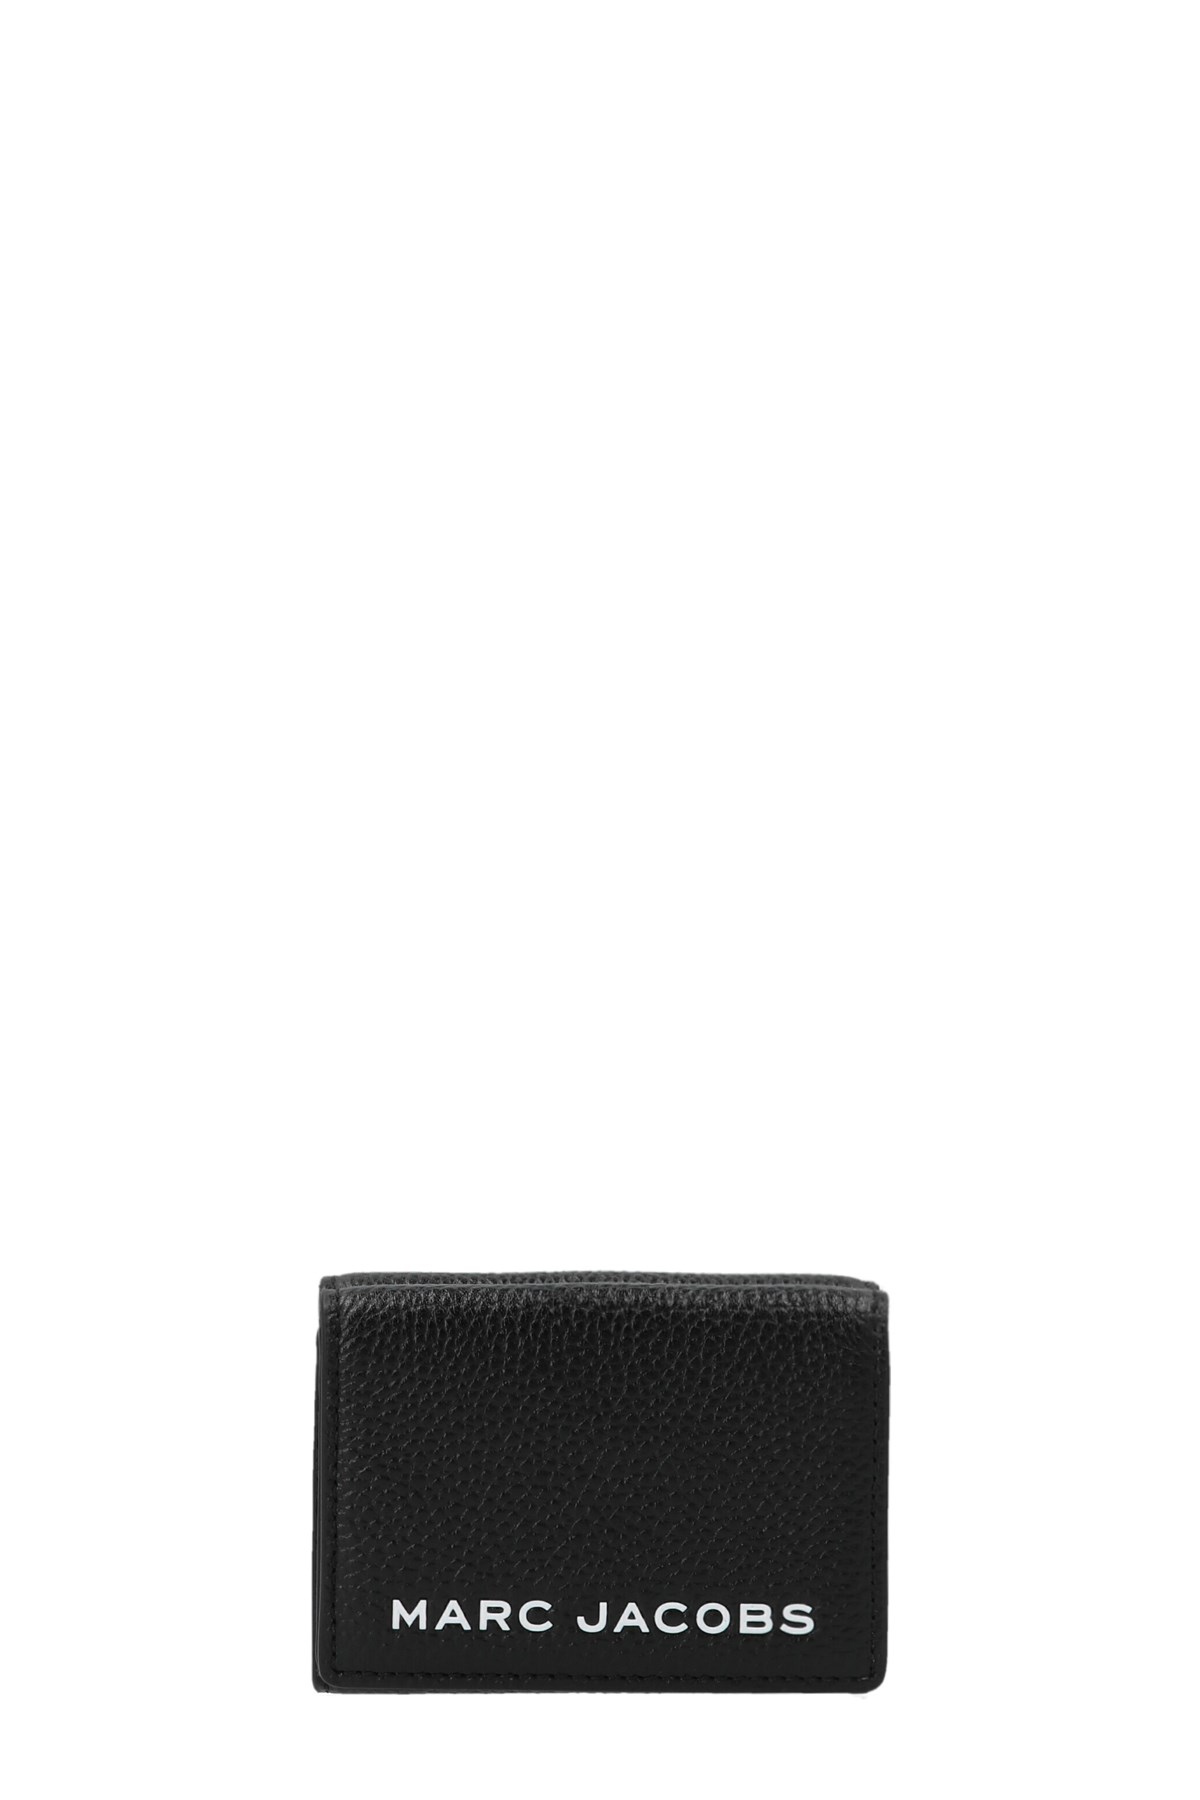 MARC JACOBS 'The Bold Medium Trifold’ Wallet